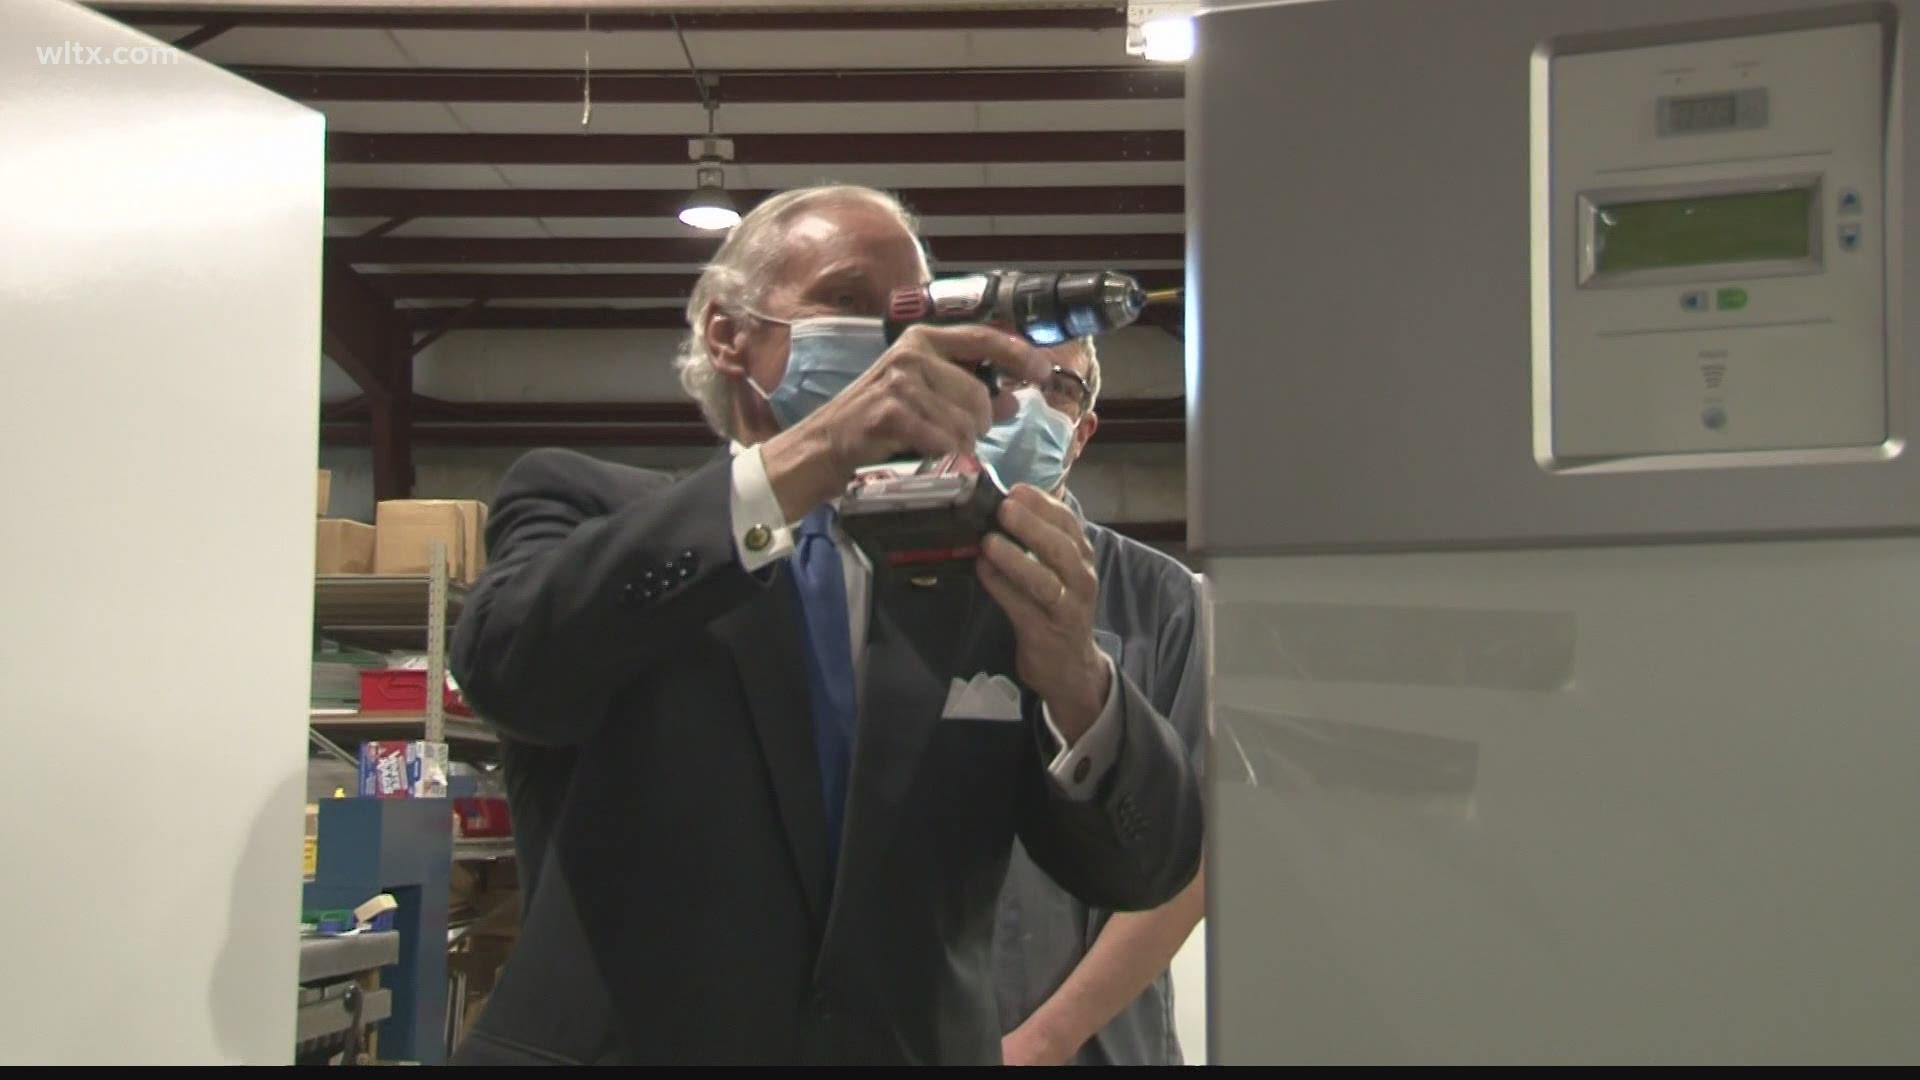 Governor McMaster got an in side look of how Horizon Scientific Incorporated in Summerville is producing vaccine refrigerators and freezers.